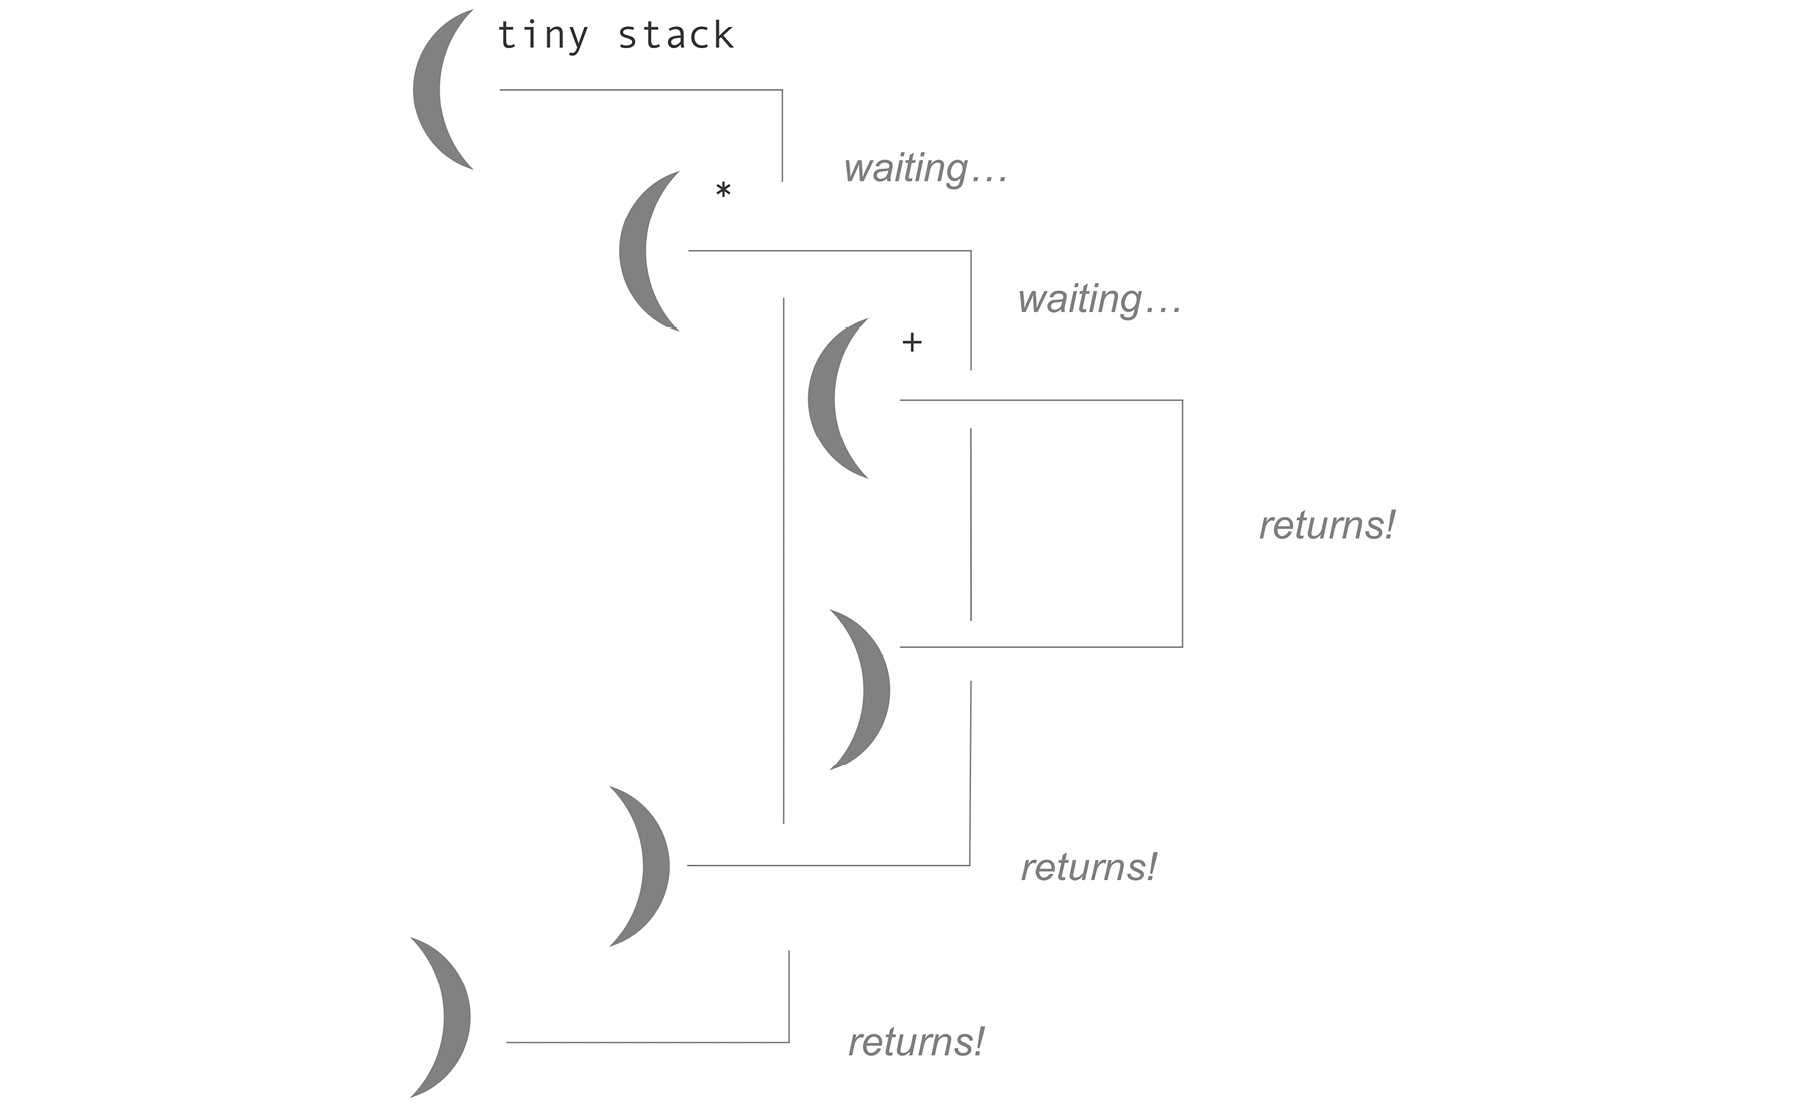 Figure 6.2: A visualization of stack frames in nested function calls
